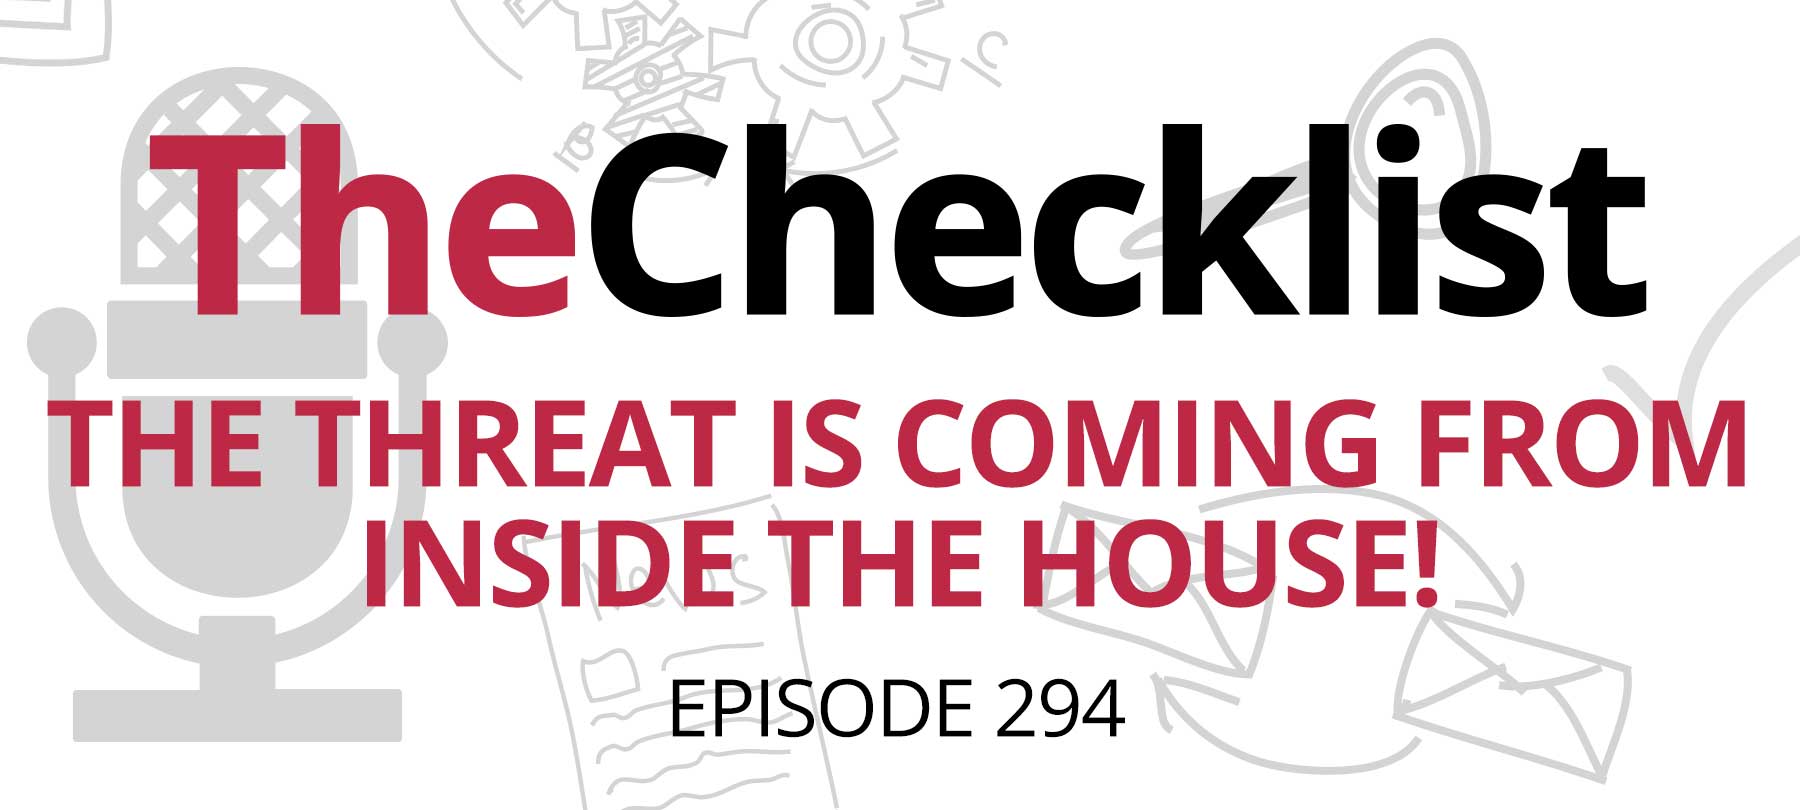 Checklist 294: The Threat is Coming from Inside the House!￼